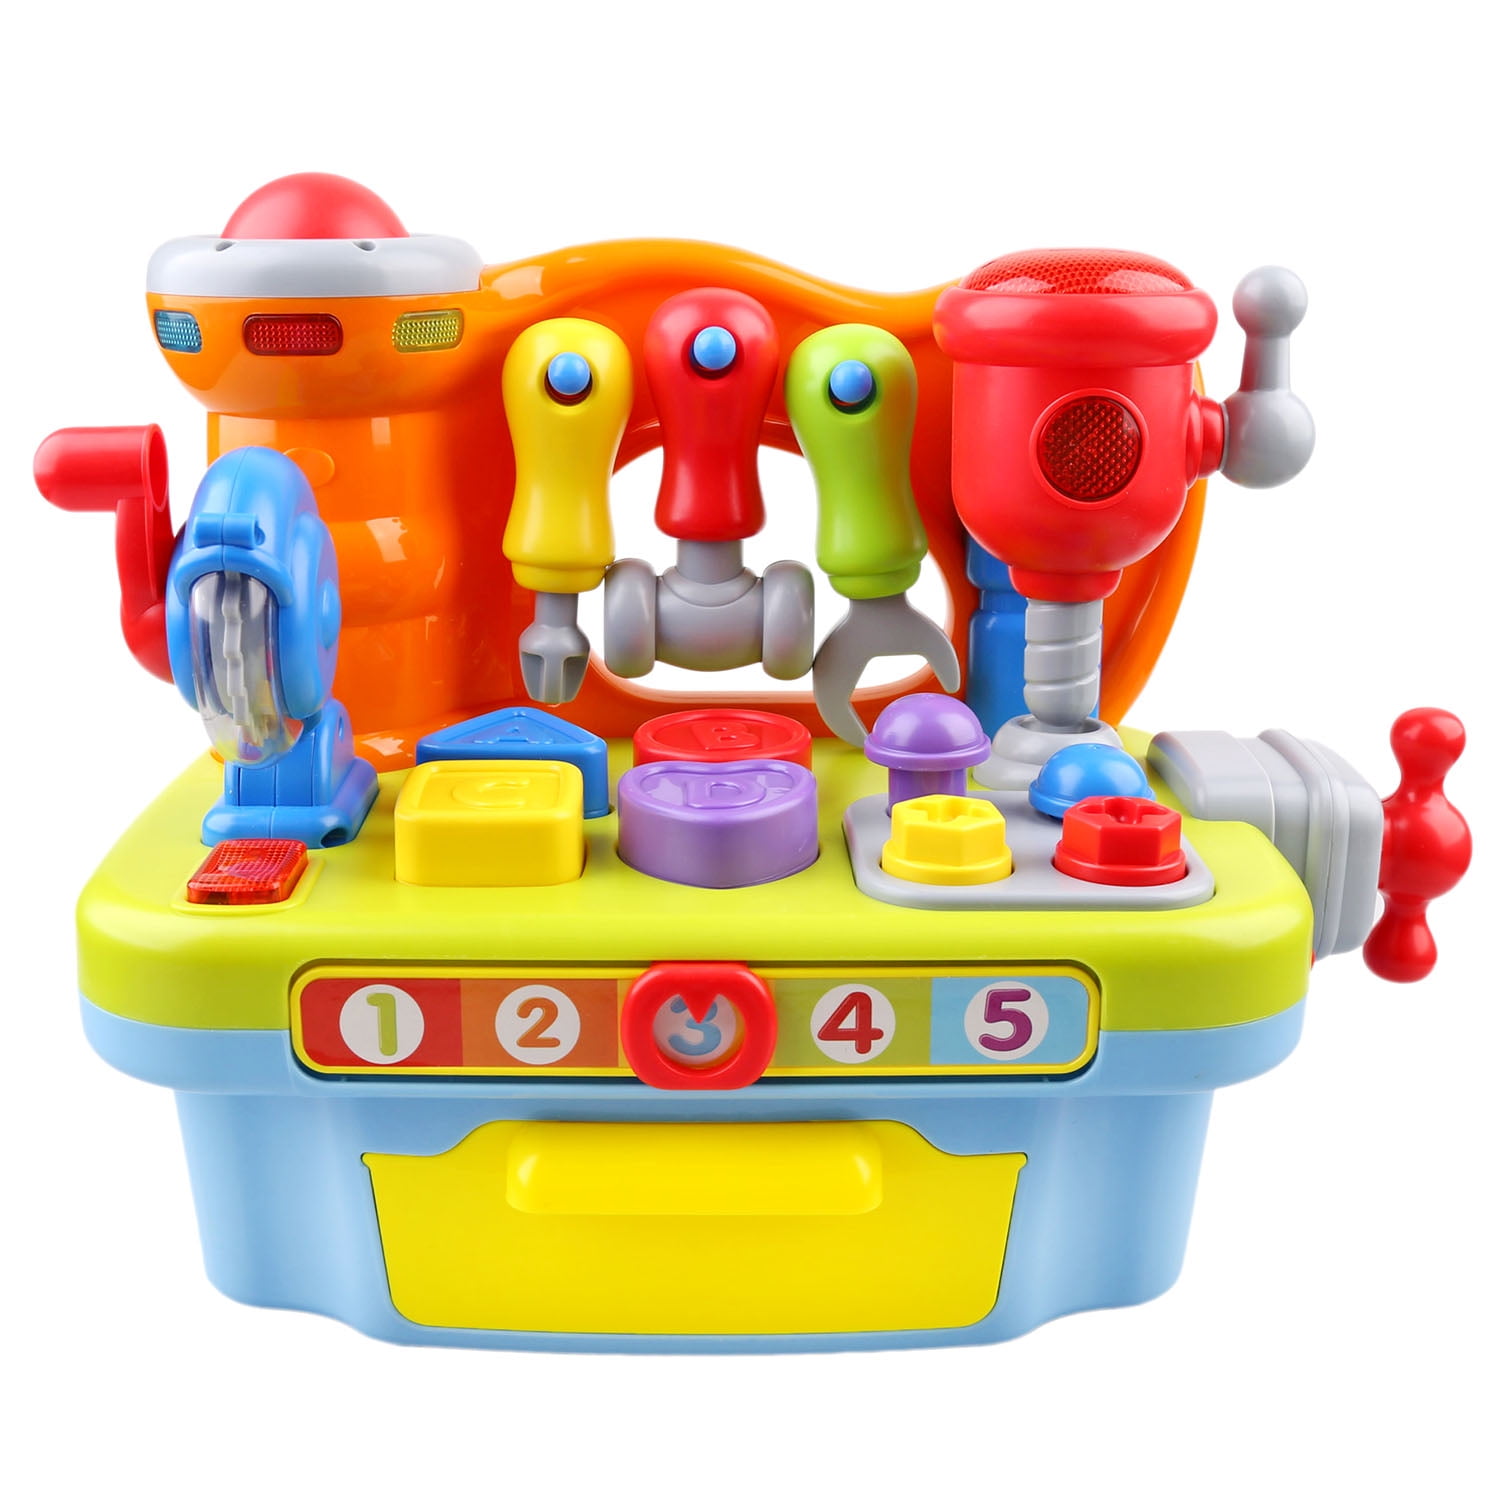 CifToys Musical Learning Workbench Tools Toy For Kids Pretend Play Toy Box 